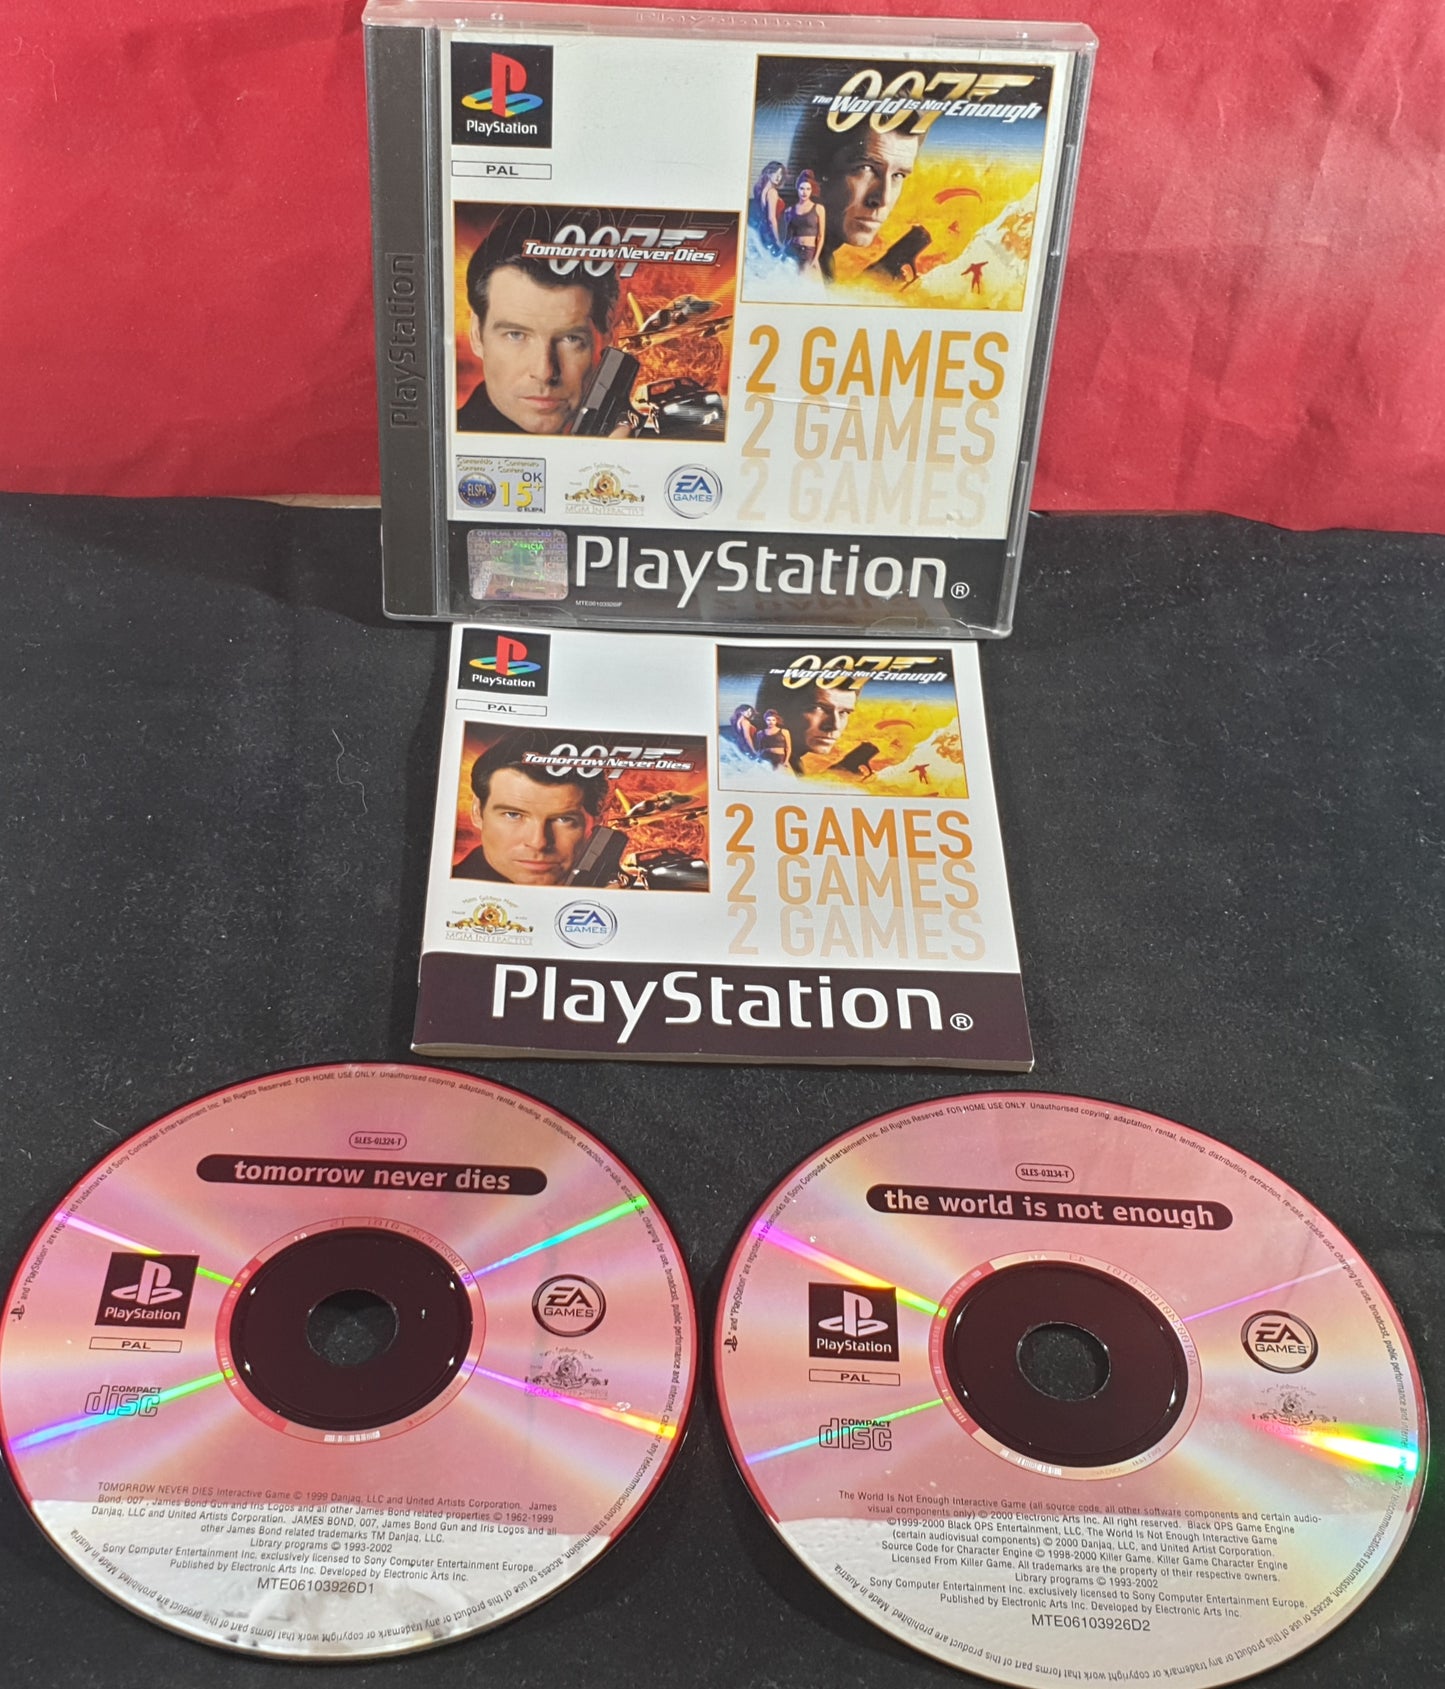 007 Tomorrow Never Dies & The World is Not Enough Twin Pack Sony Playstation 1 (PS1) Game